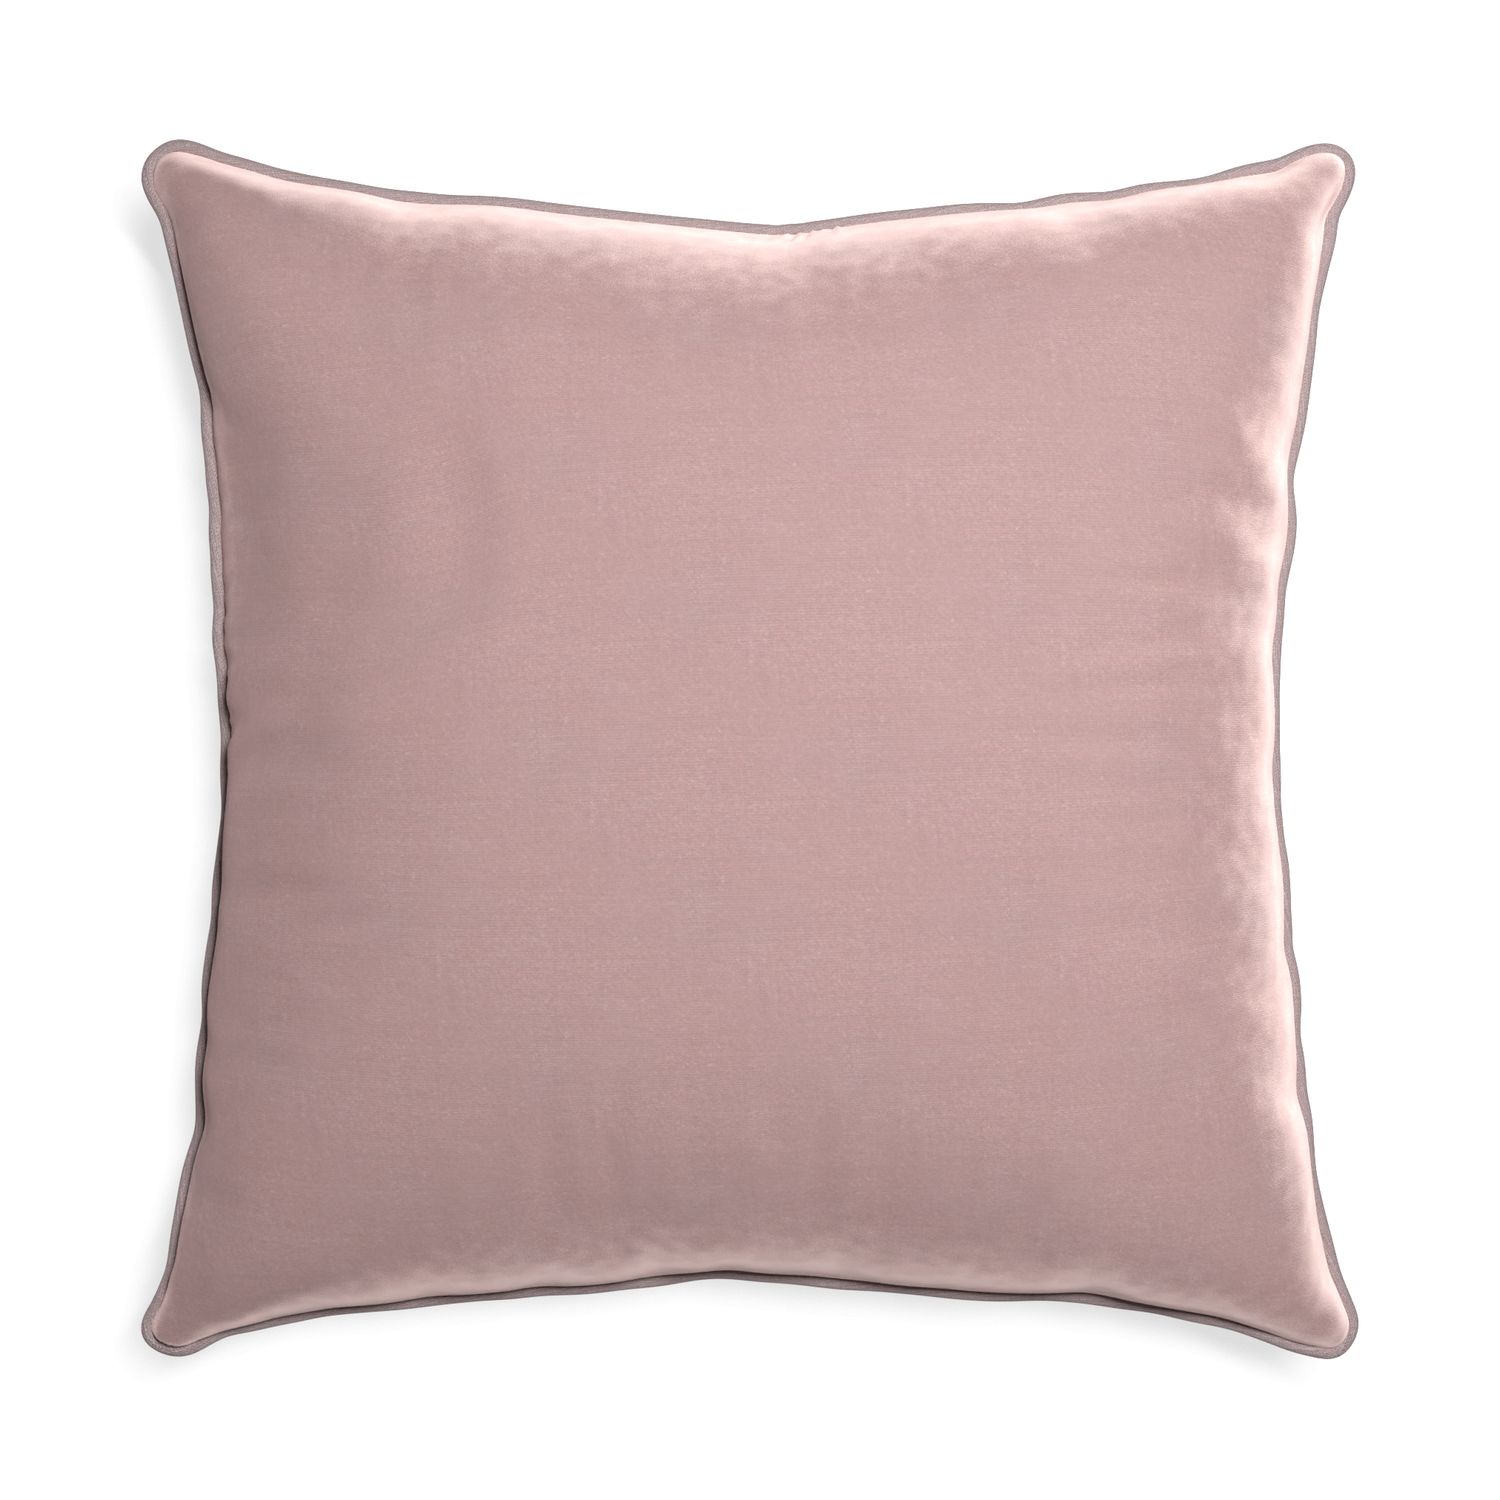 Euro-sham mauve velvet custom mauvepillow with orchid piping on white background